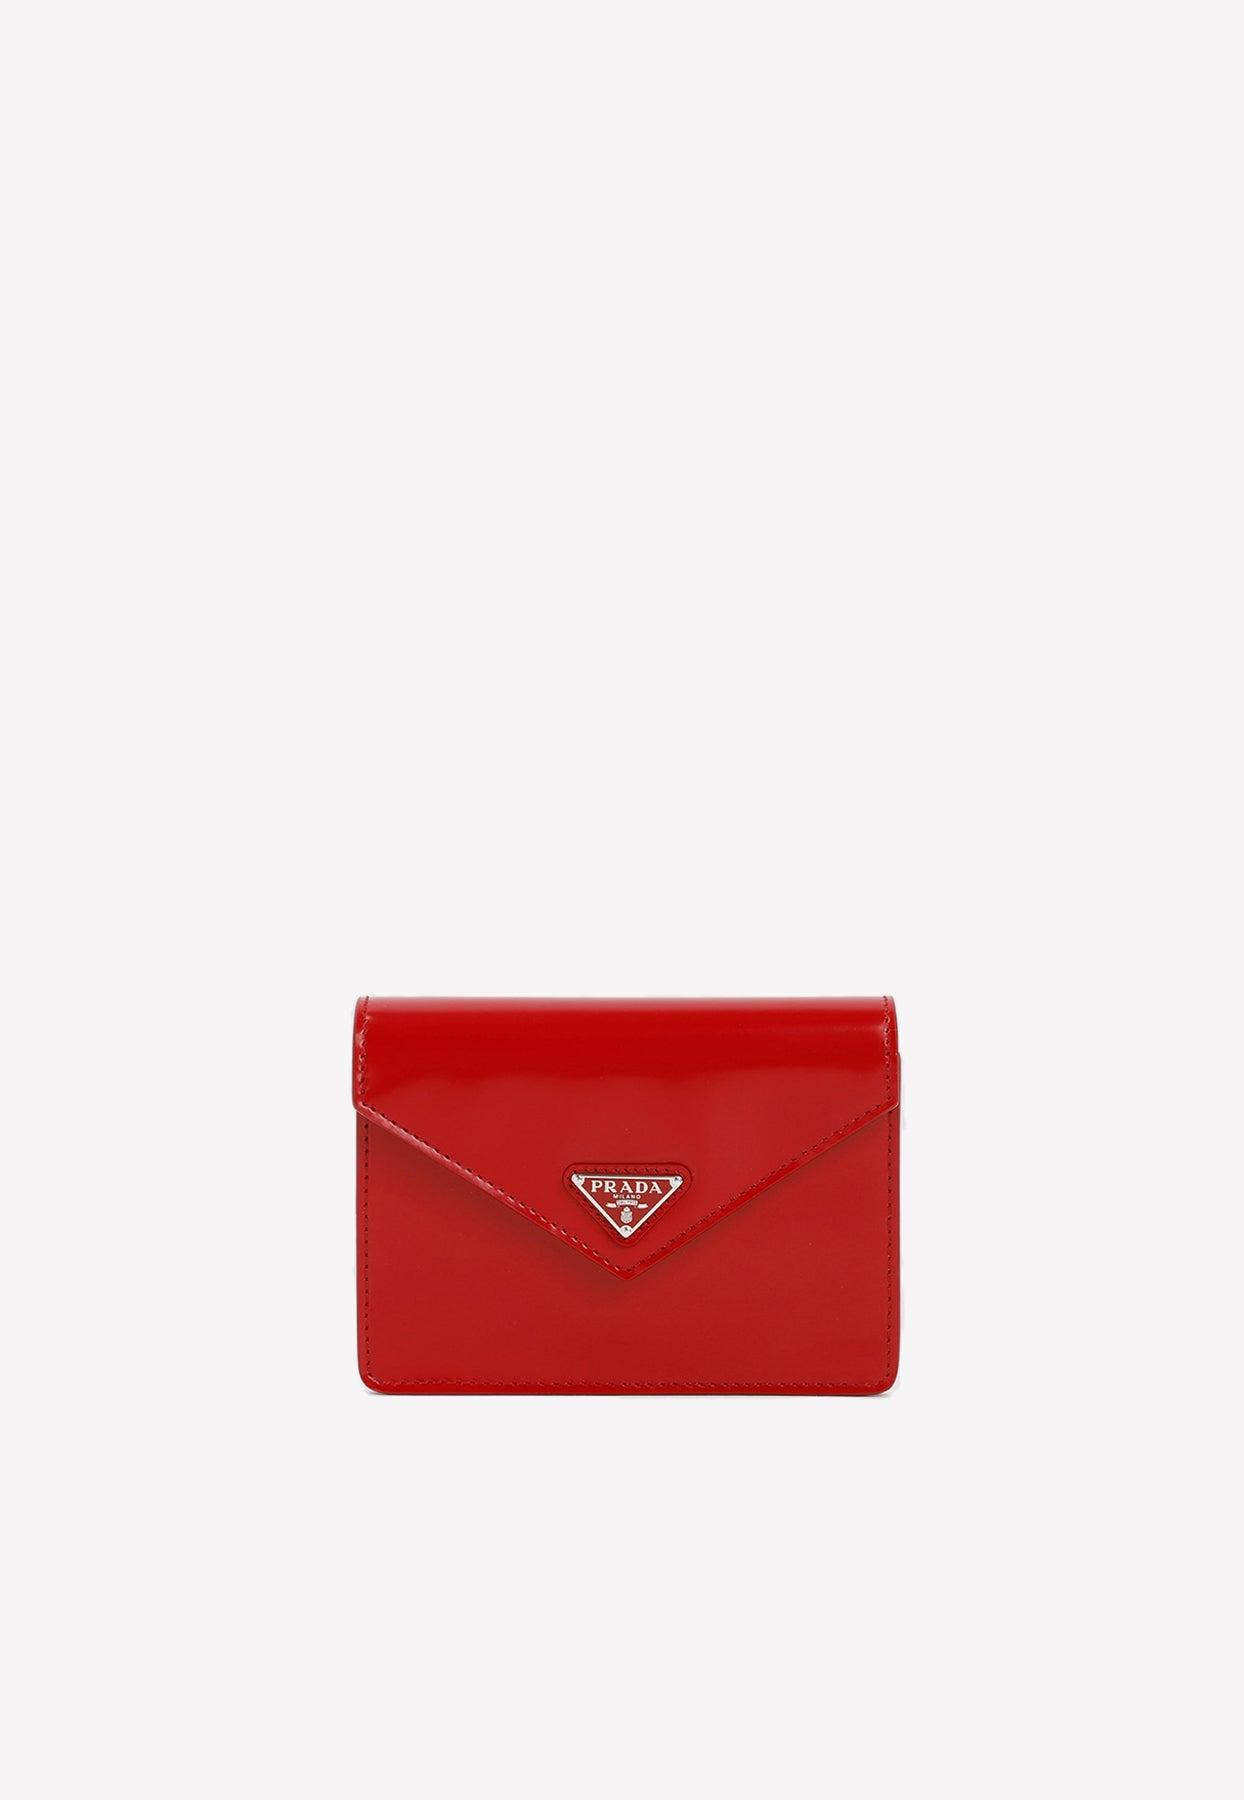 Prada Playing cards with leather case